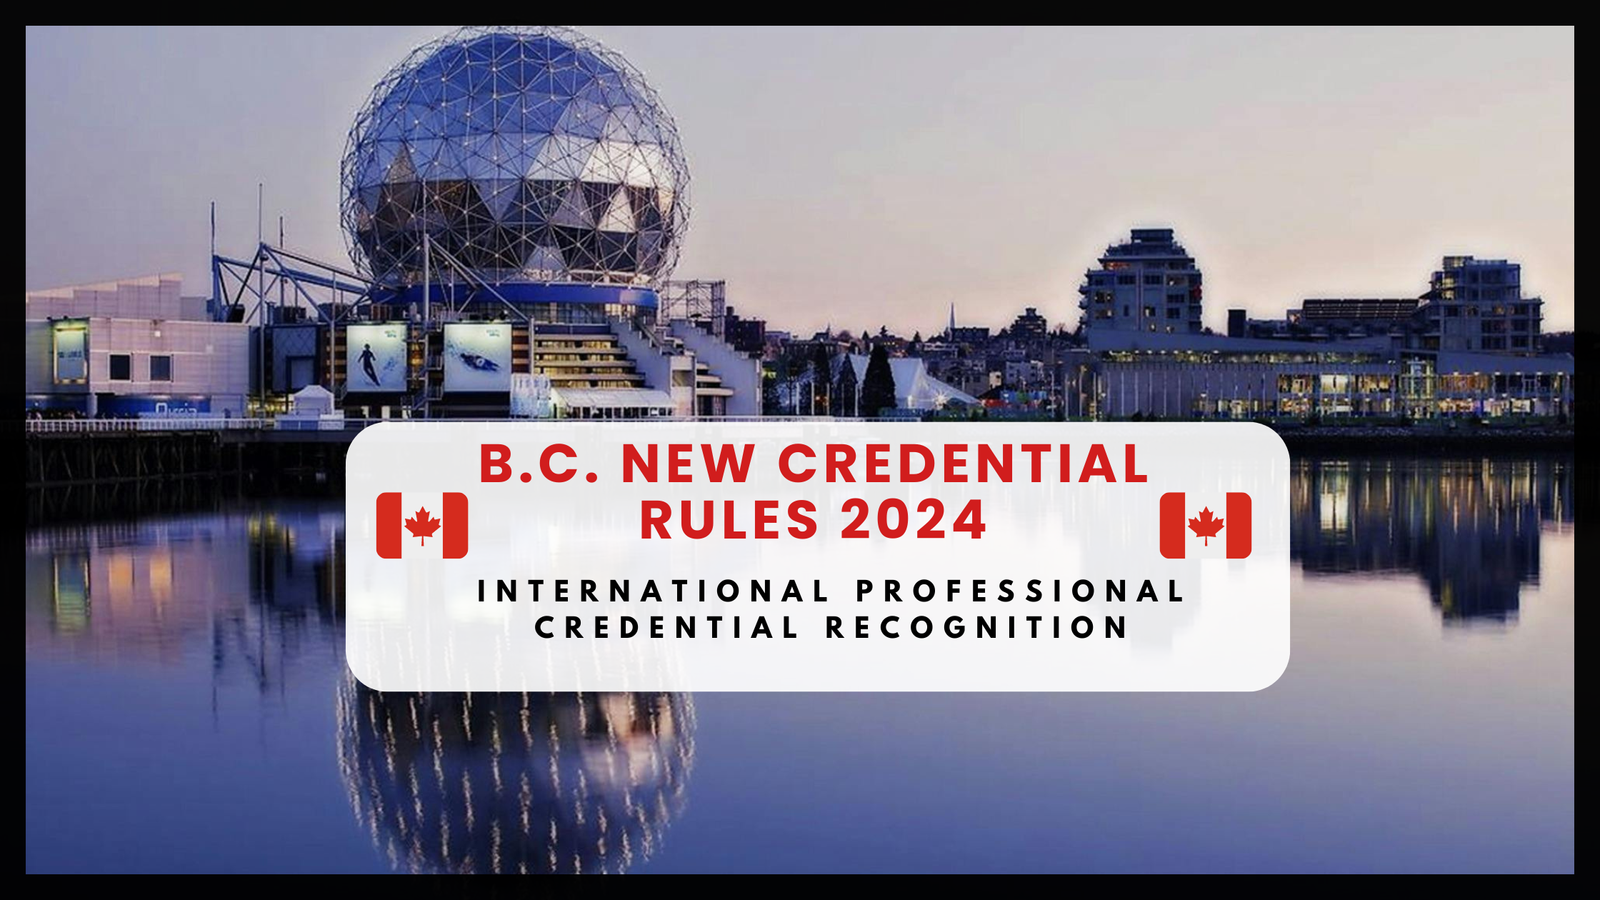 B.C. New Credential Rules 2024